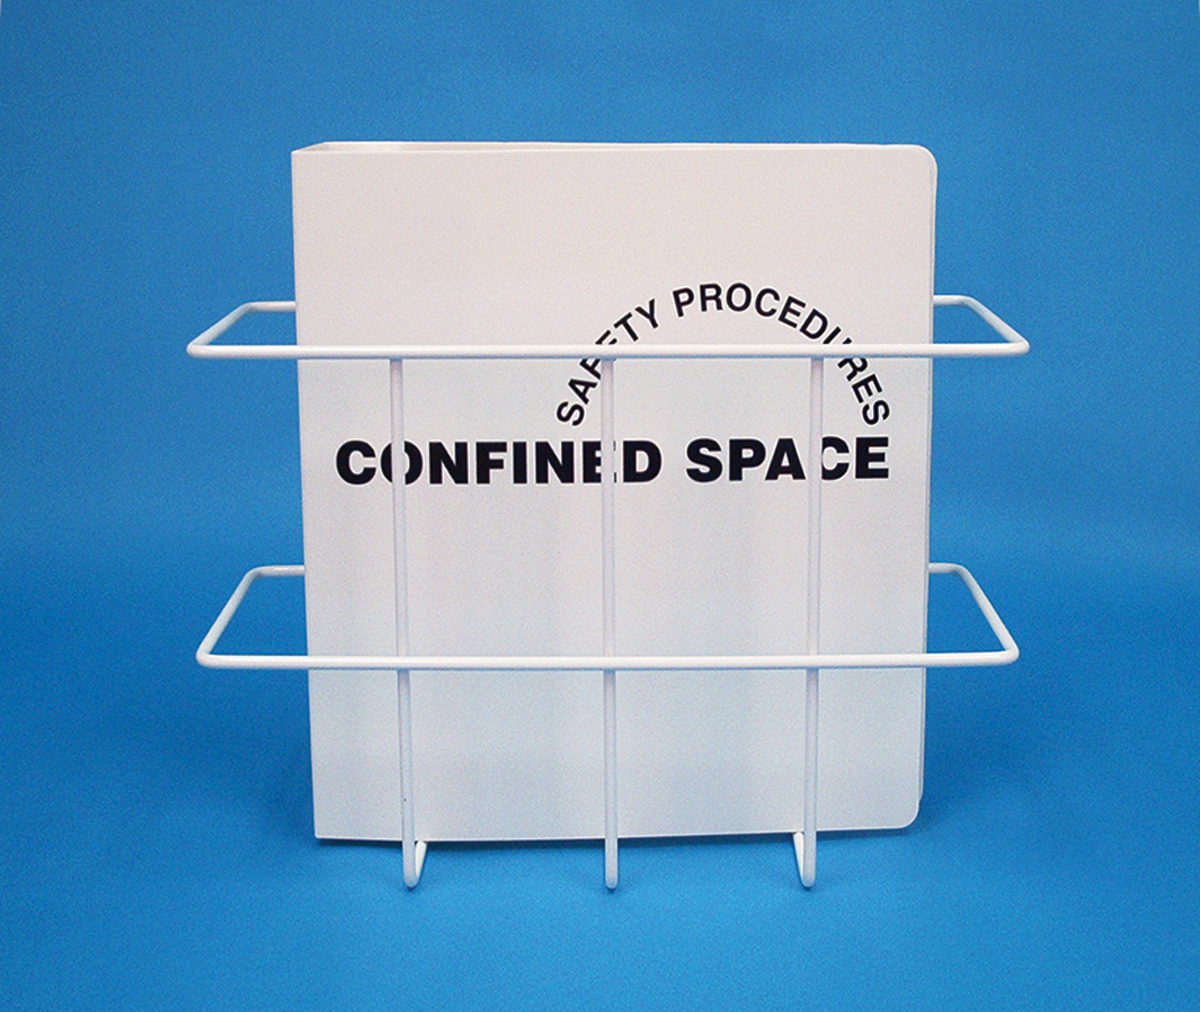 Confined Space, Legend: CONFINED SPACE BINDER & RACK